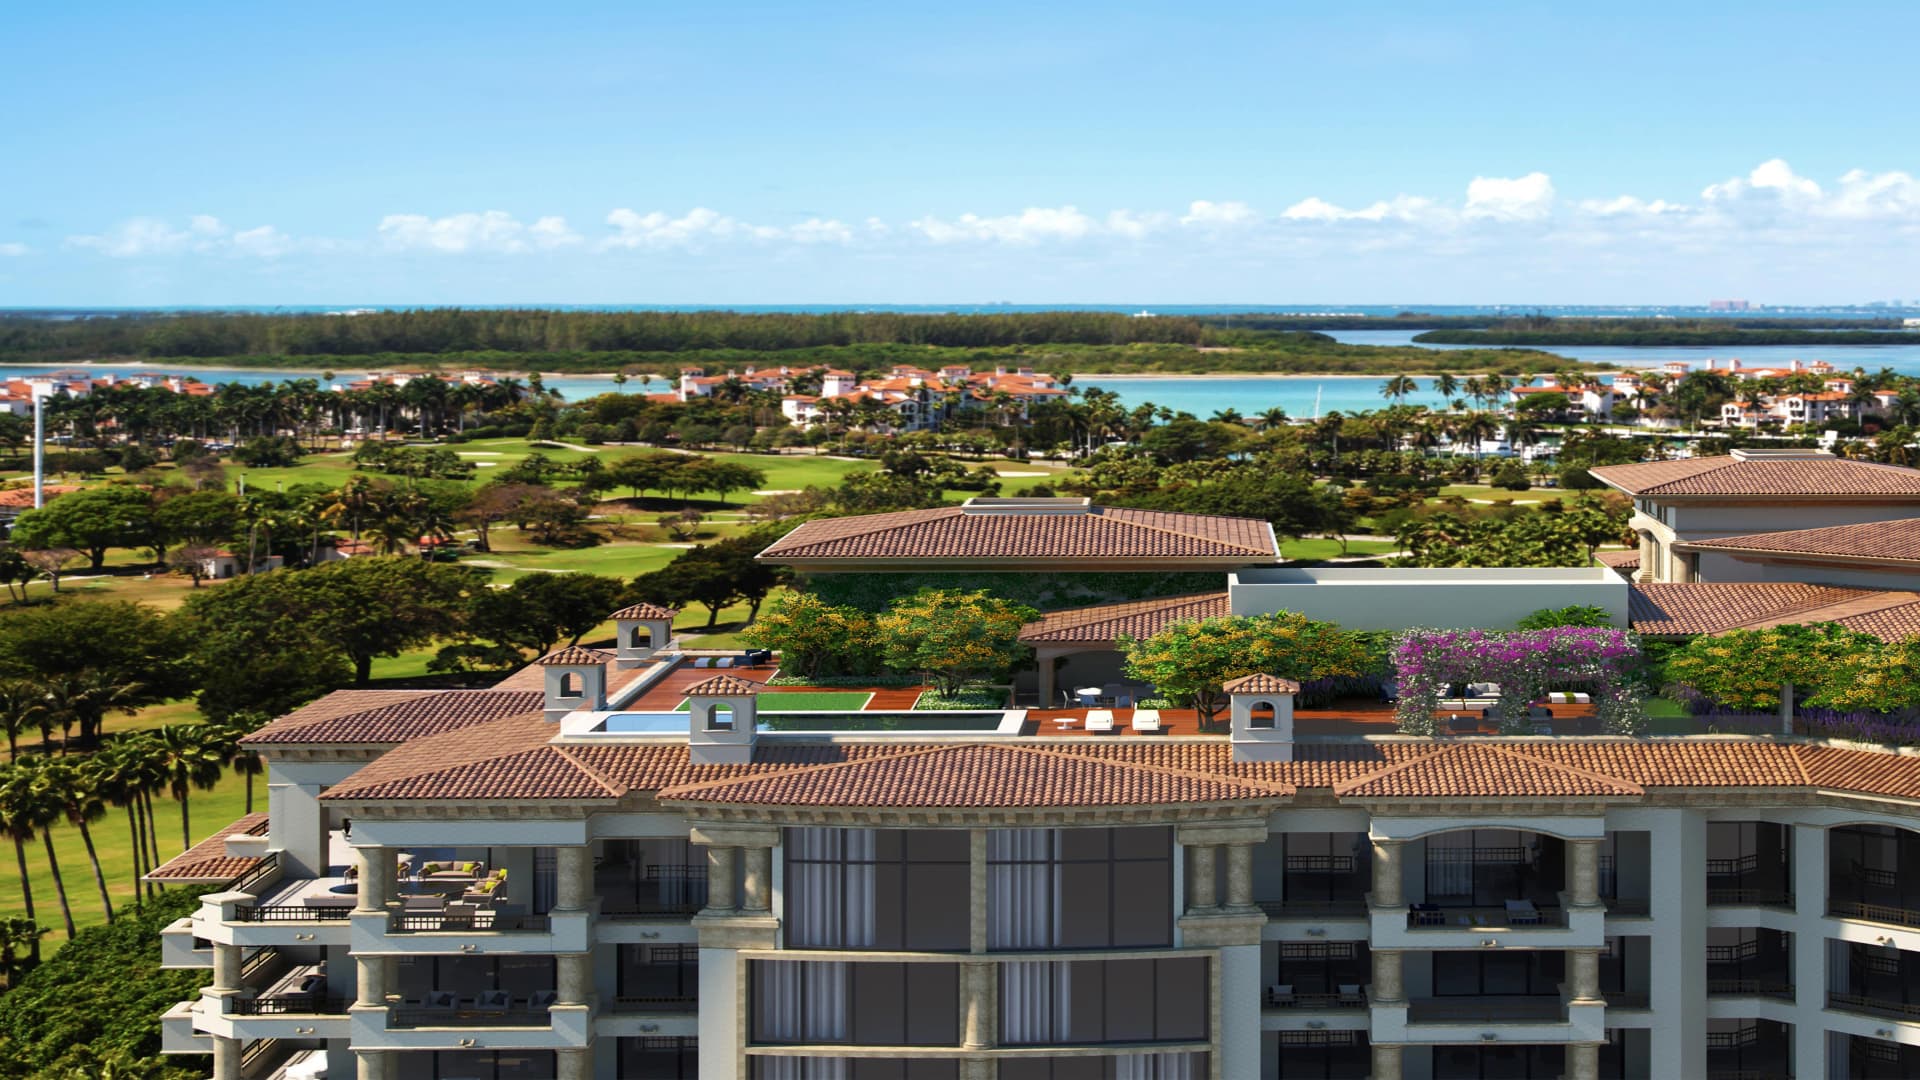 A rendering of the penthouse rooftop area atop Fisher Island's Palazzo Della Luna.